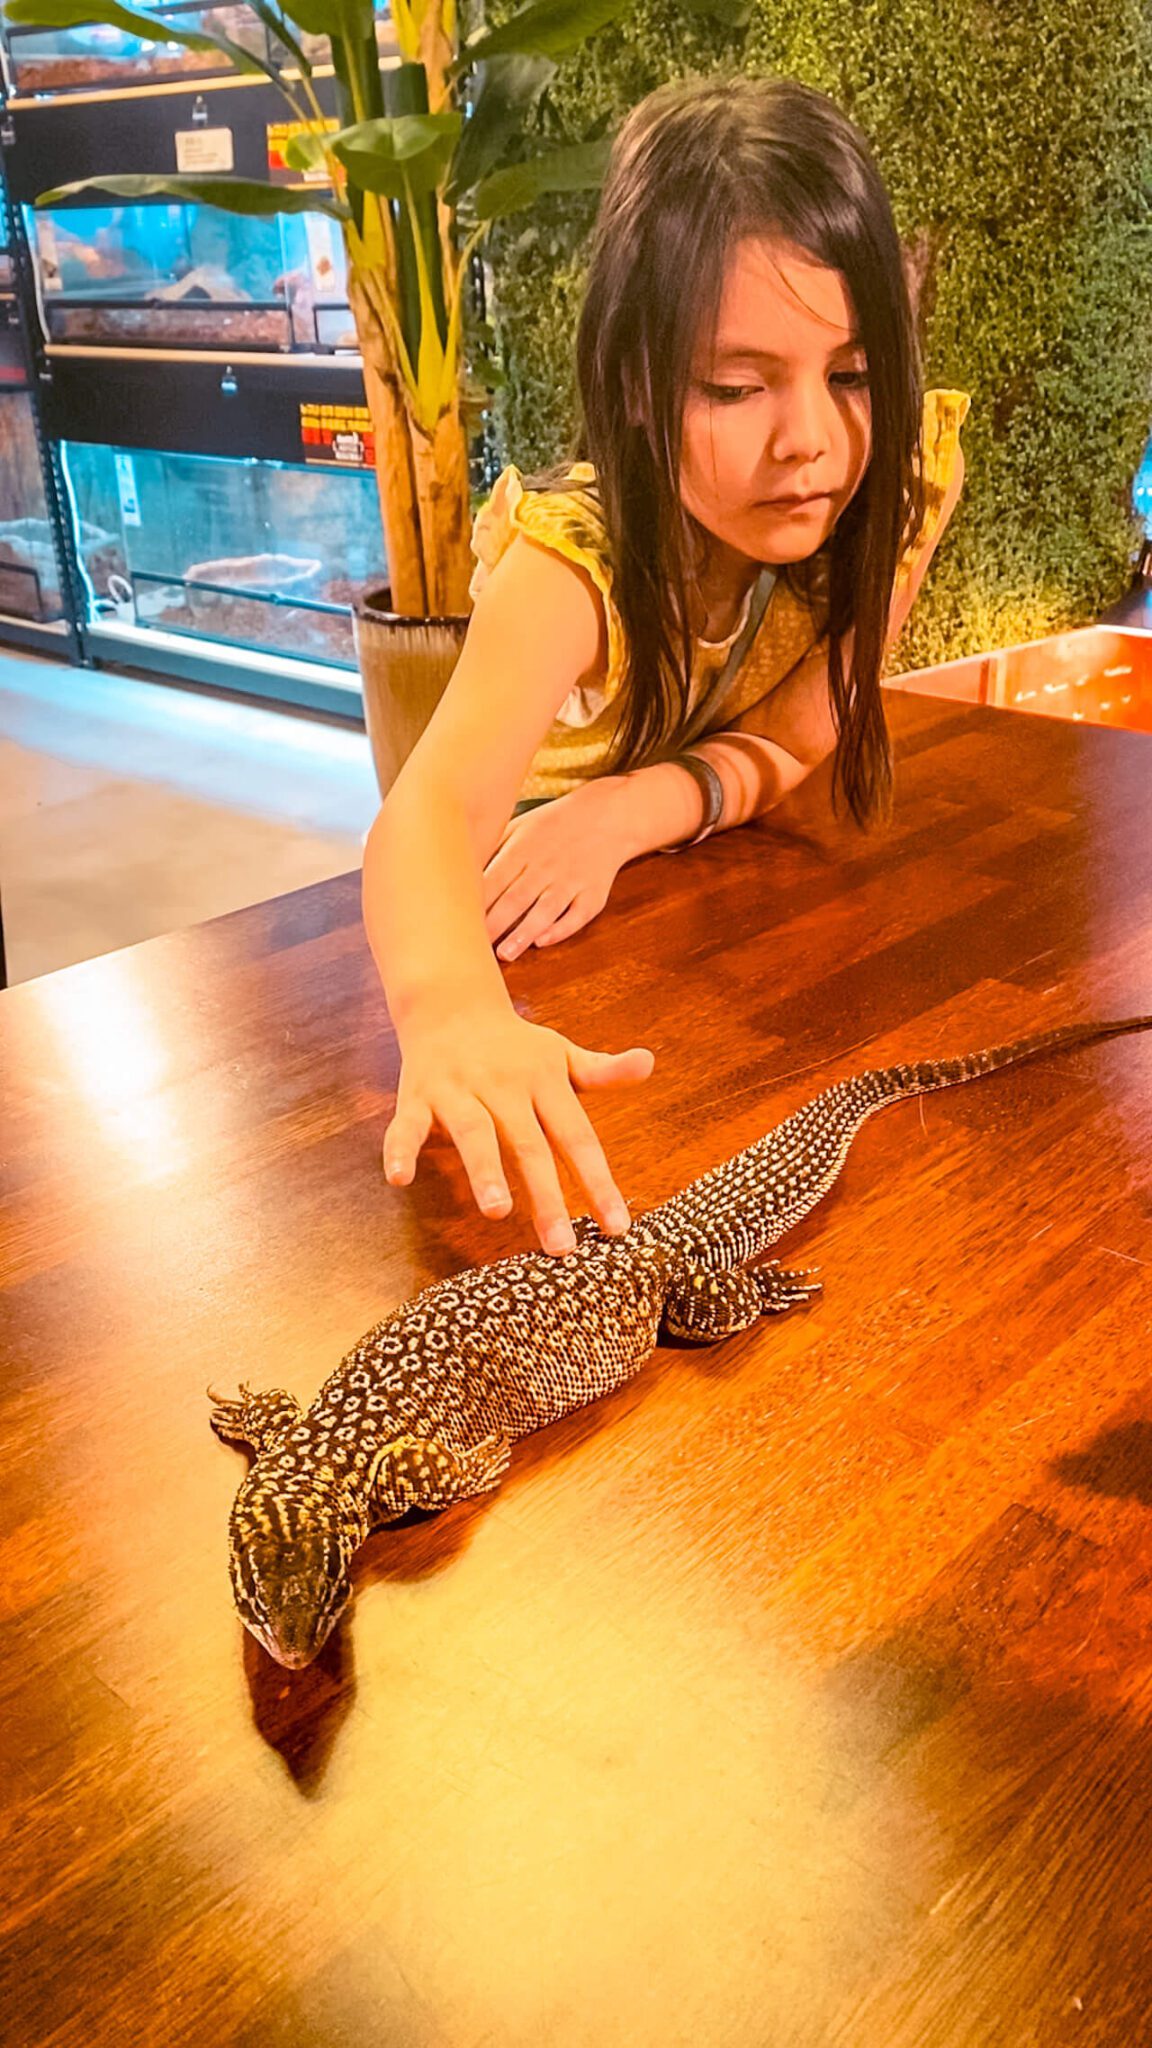 things to do indoors in seoul with kids | animal cafes